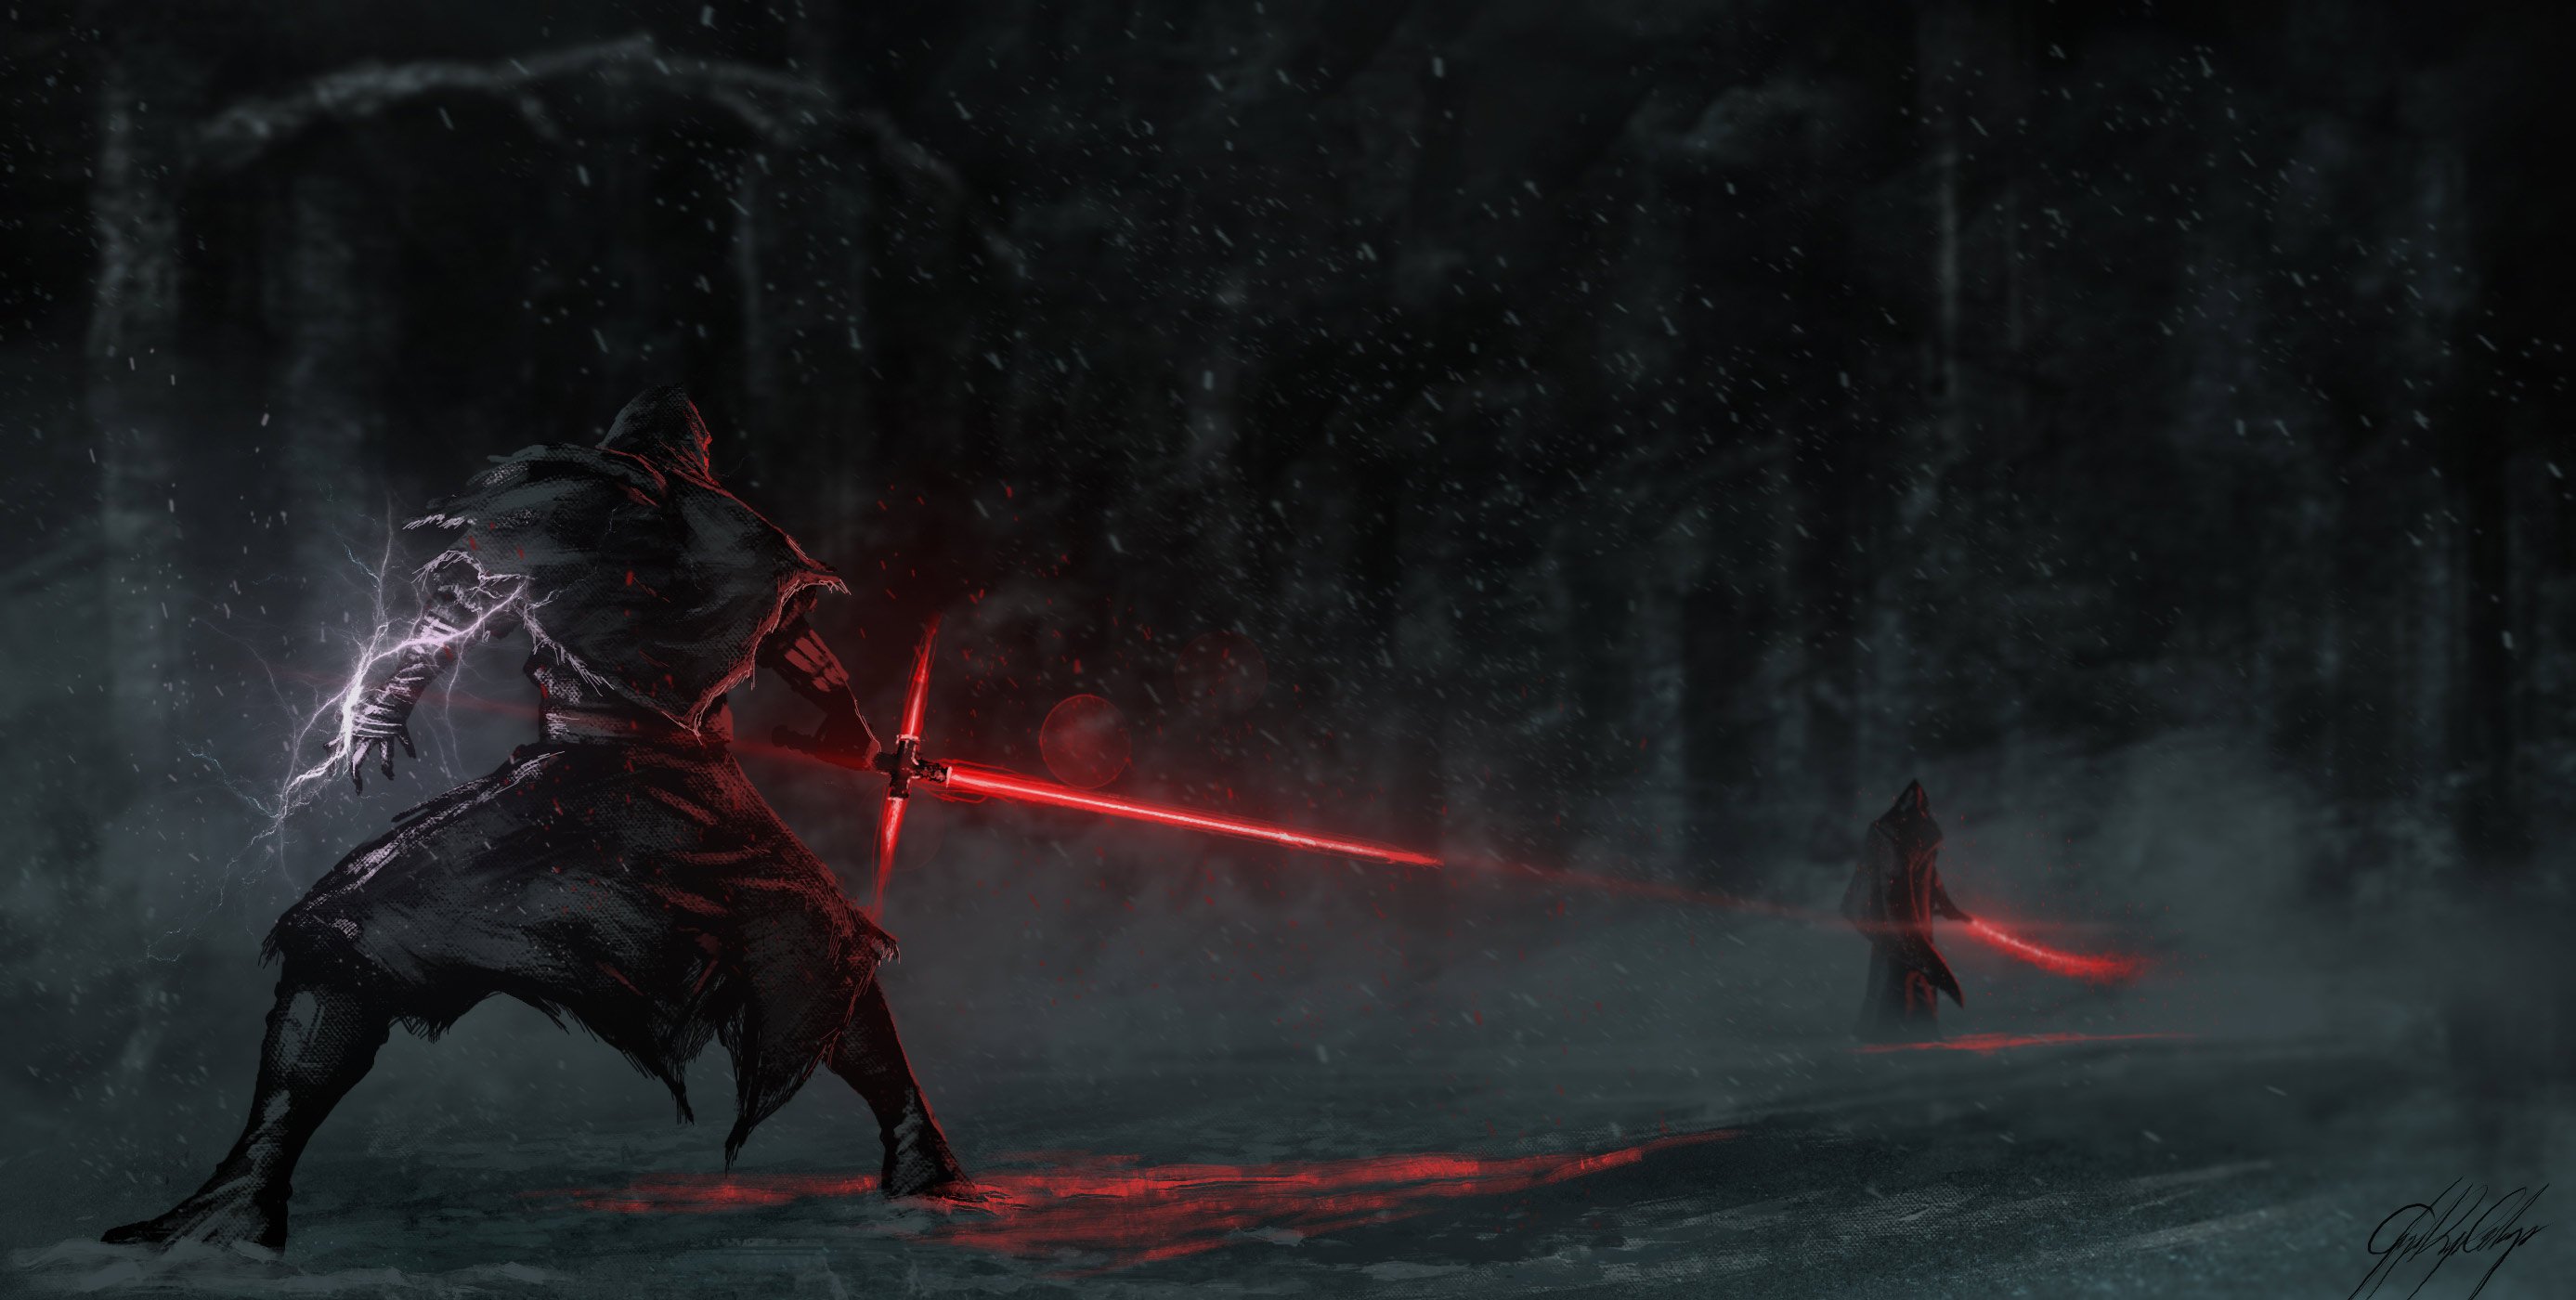  Friday Star Wars VII The Force Awakens by techgnotic